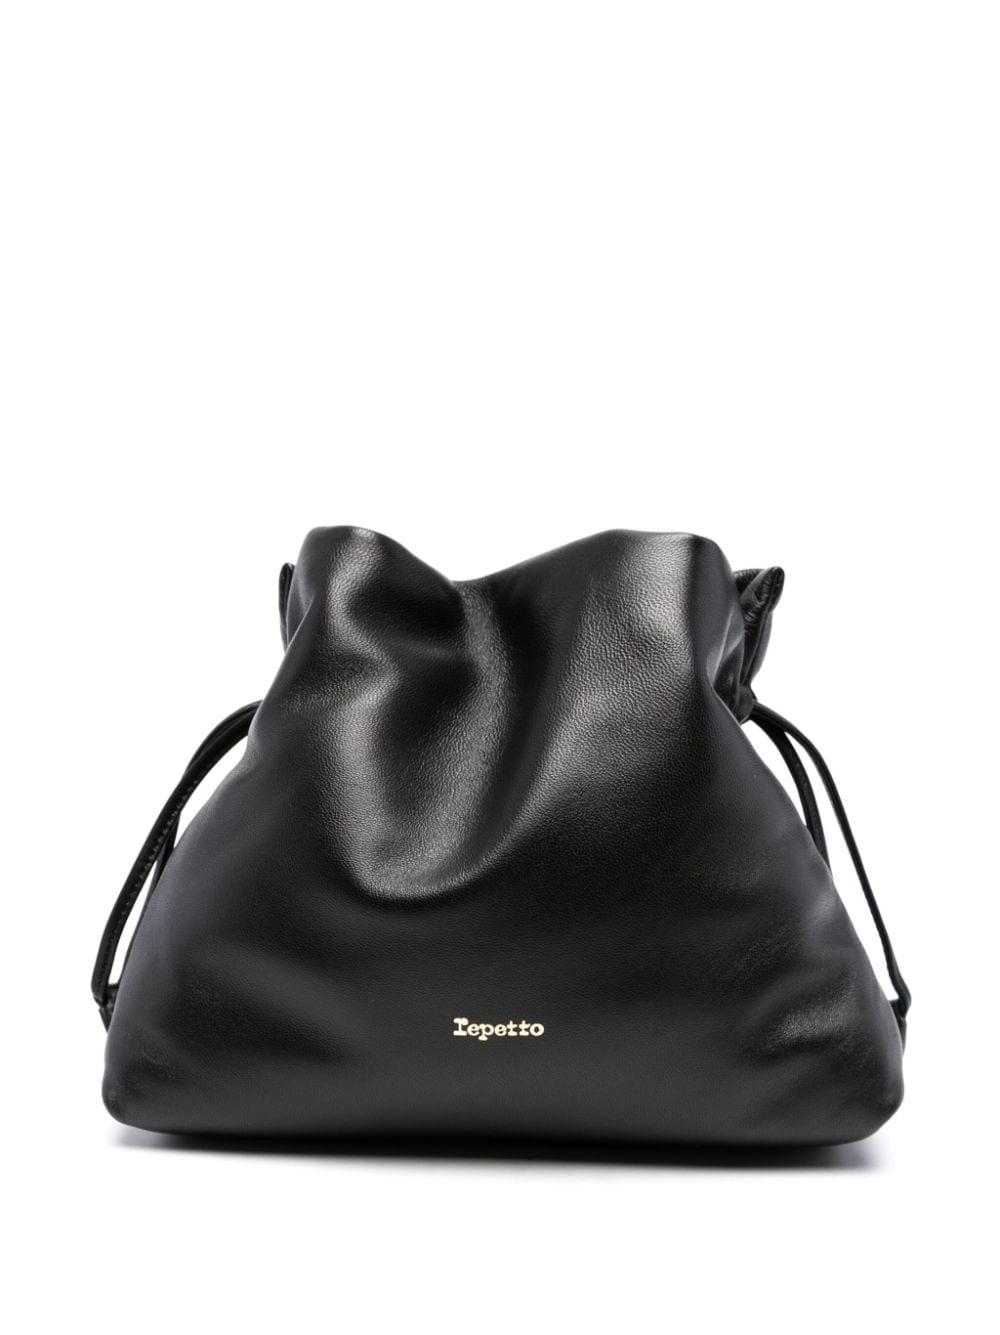 Repetto Plume Leather Shoulder Bag in Black | Lyst